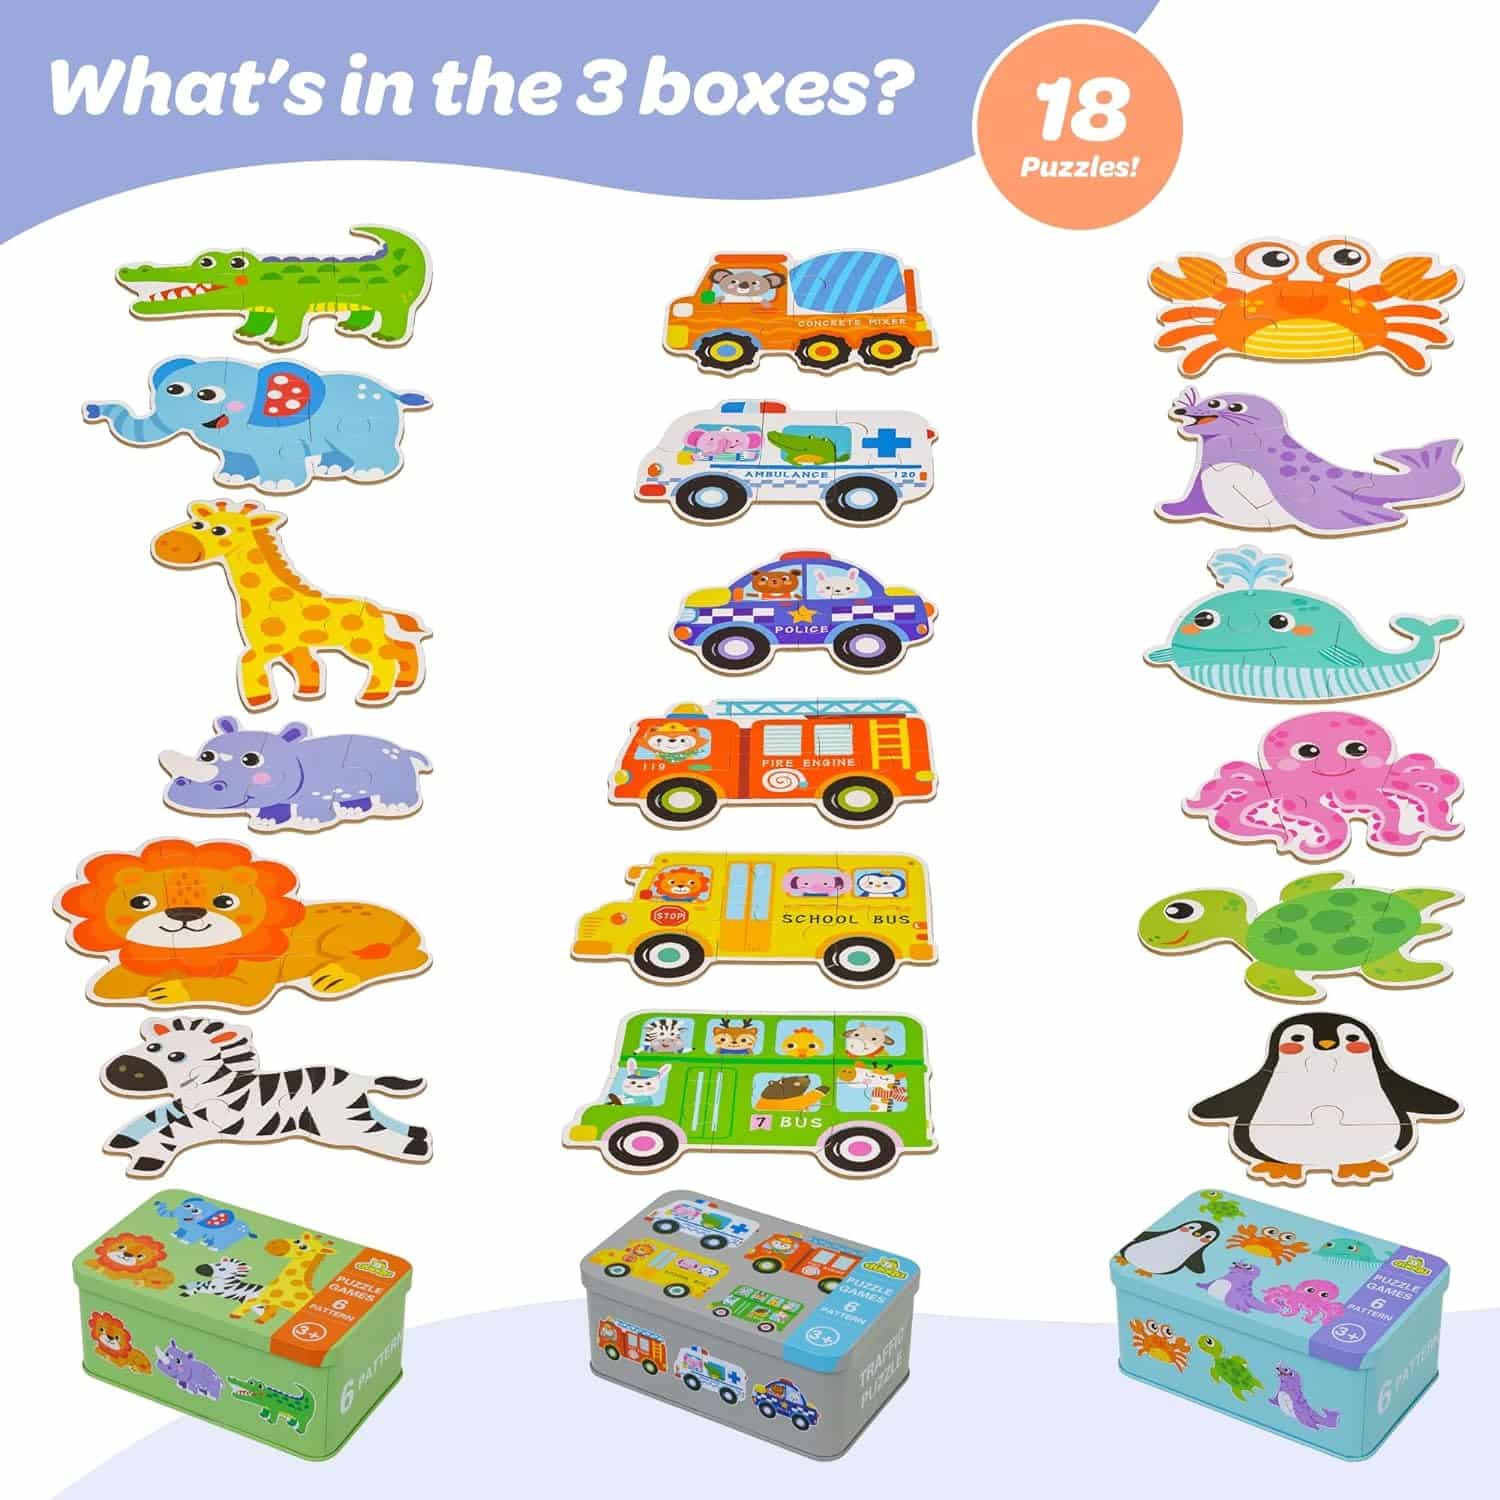 PLAYHIVE Montessori Wooden Puzzles: A Fun and Educational Toy Bundle for Kids Ages 3-5